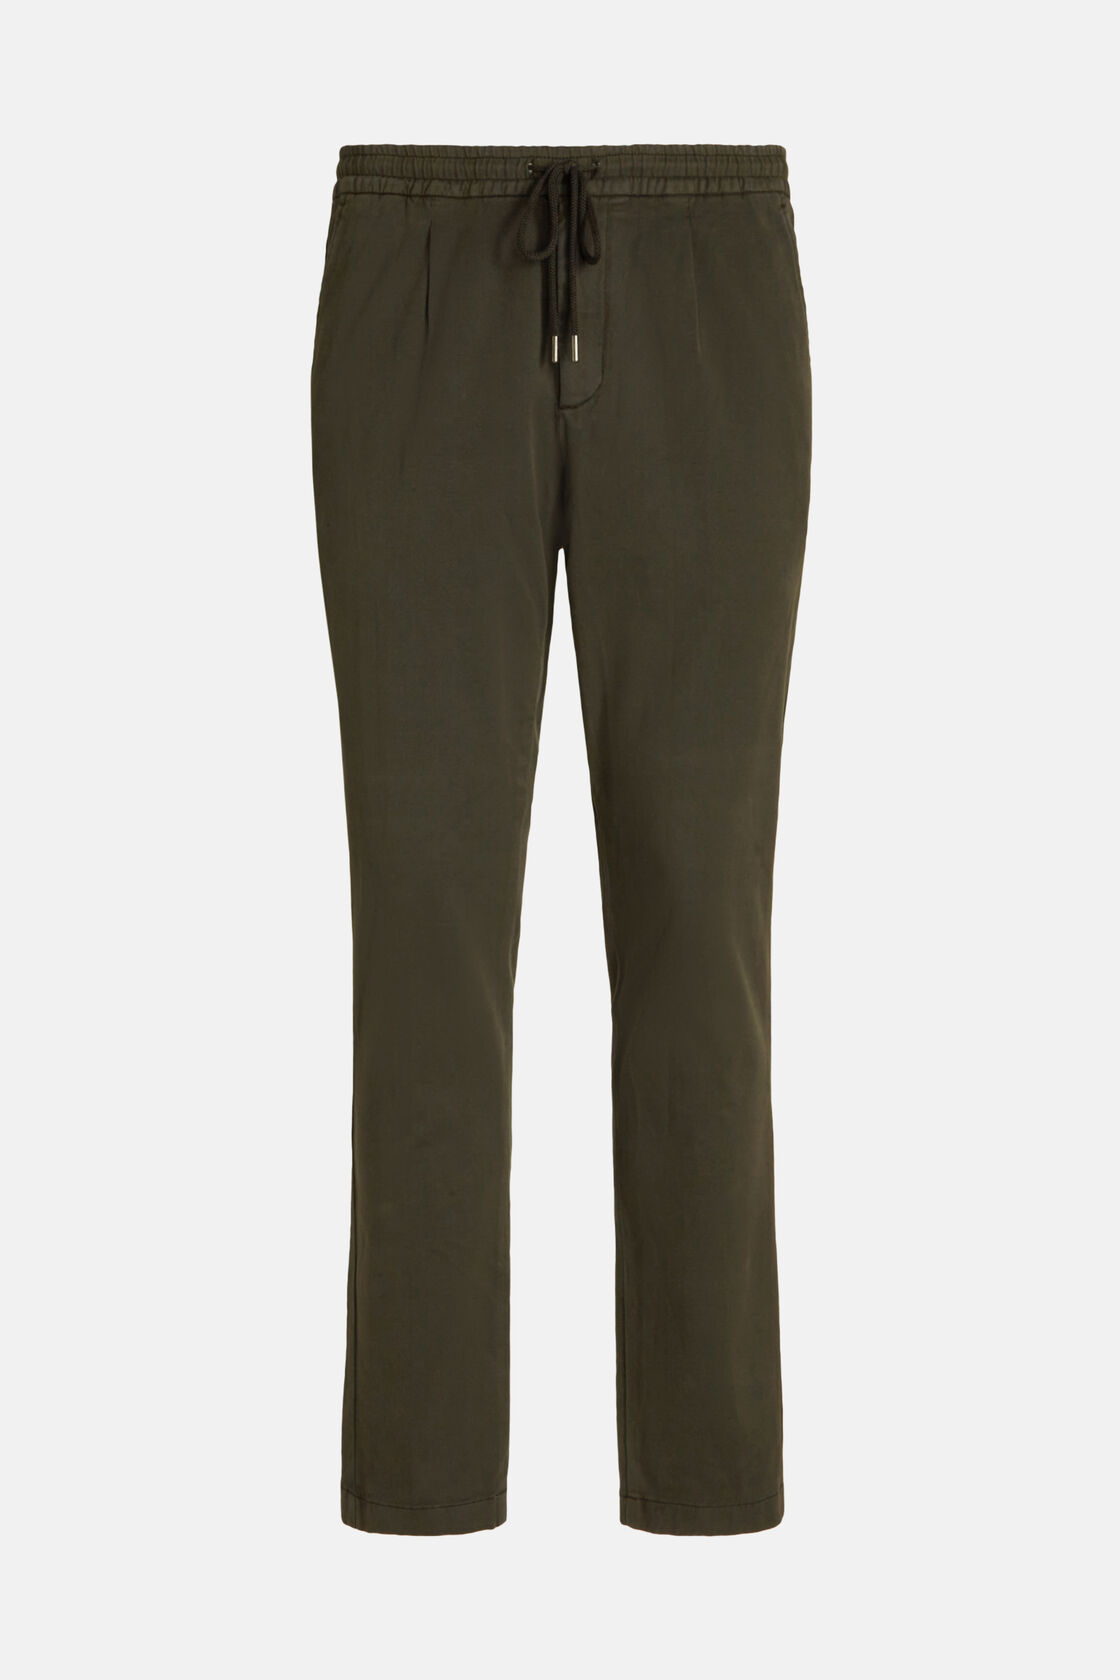 Stretch Cotton/Tencel Trousers, Green, hi-res